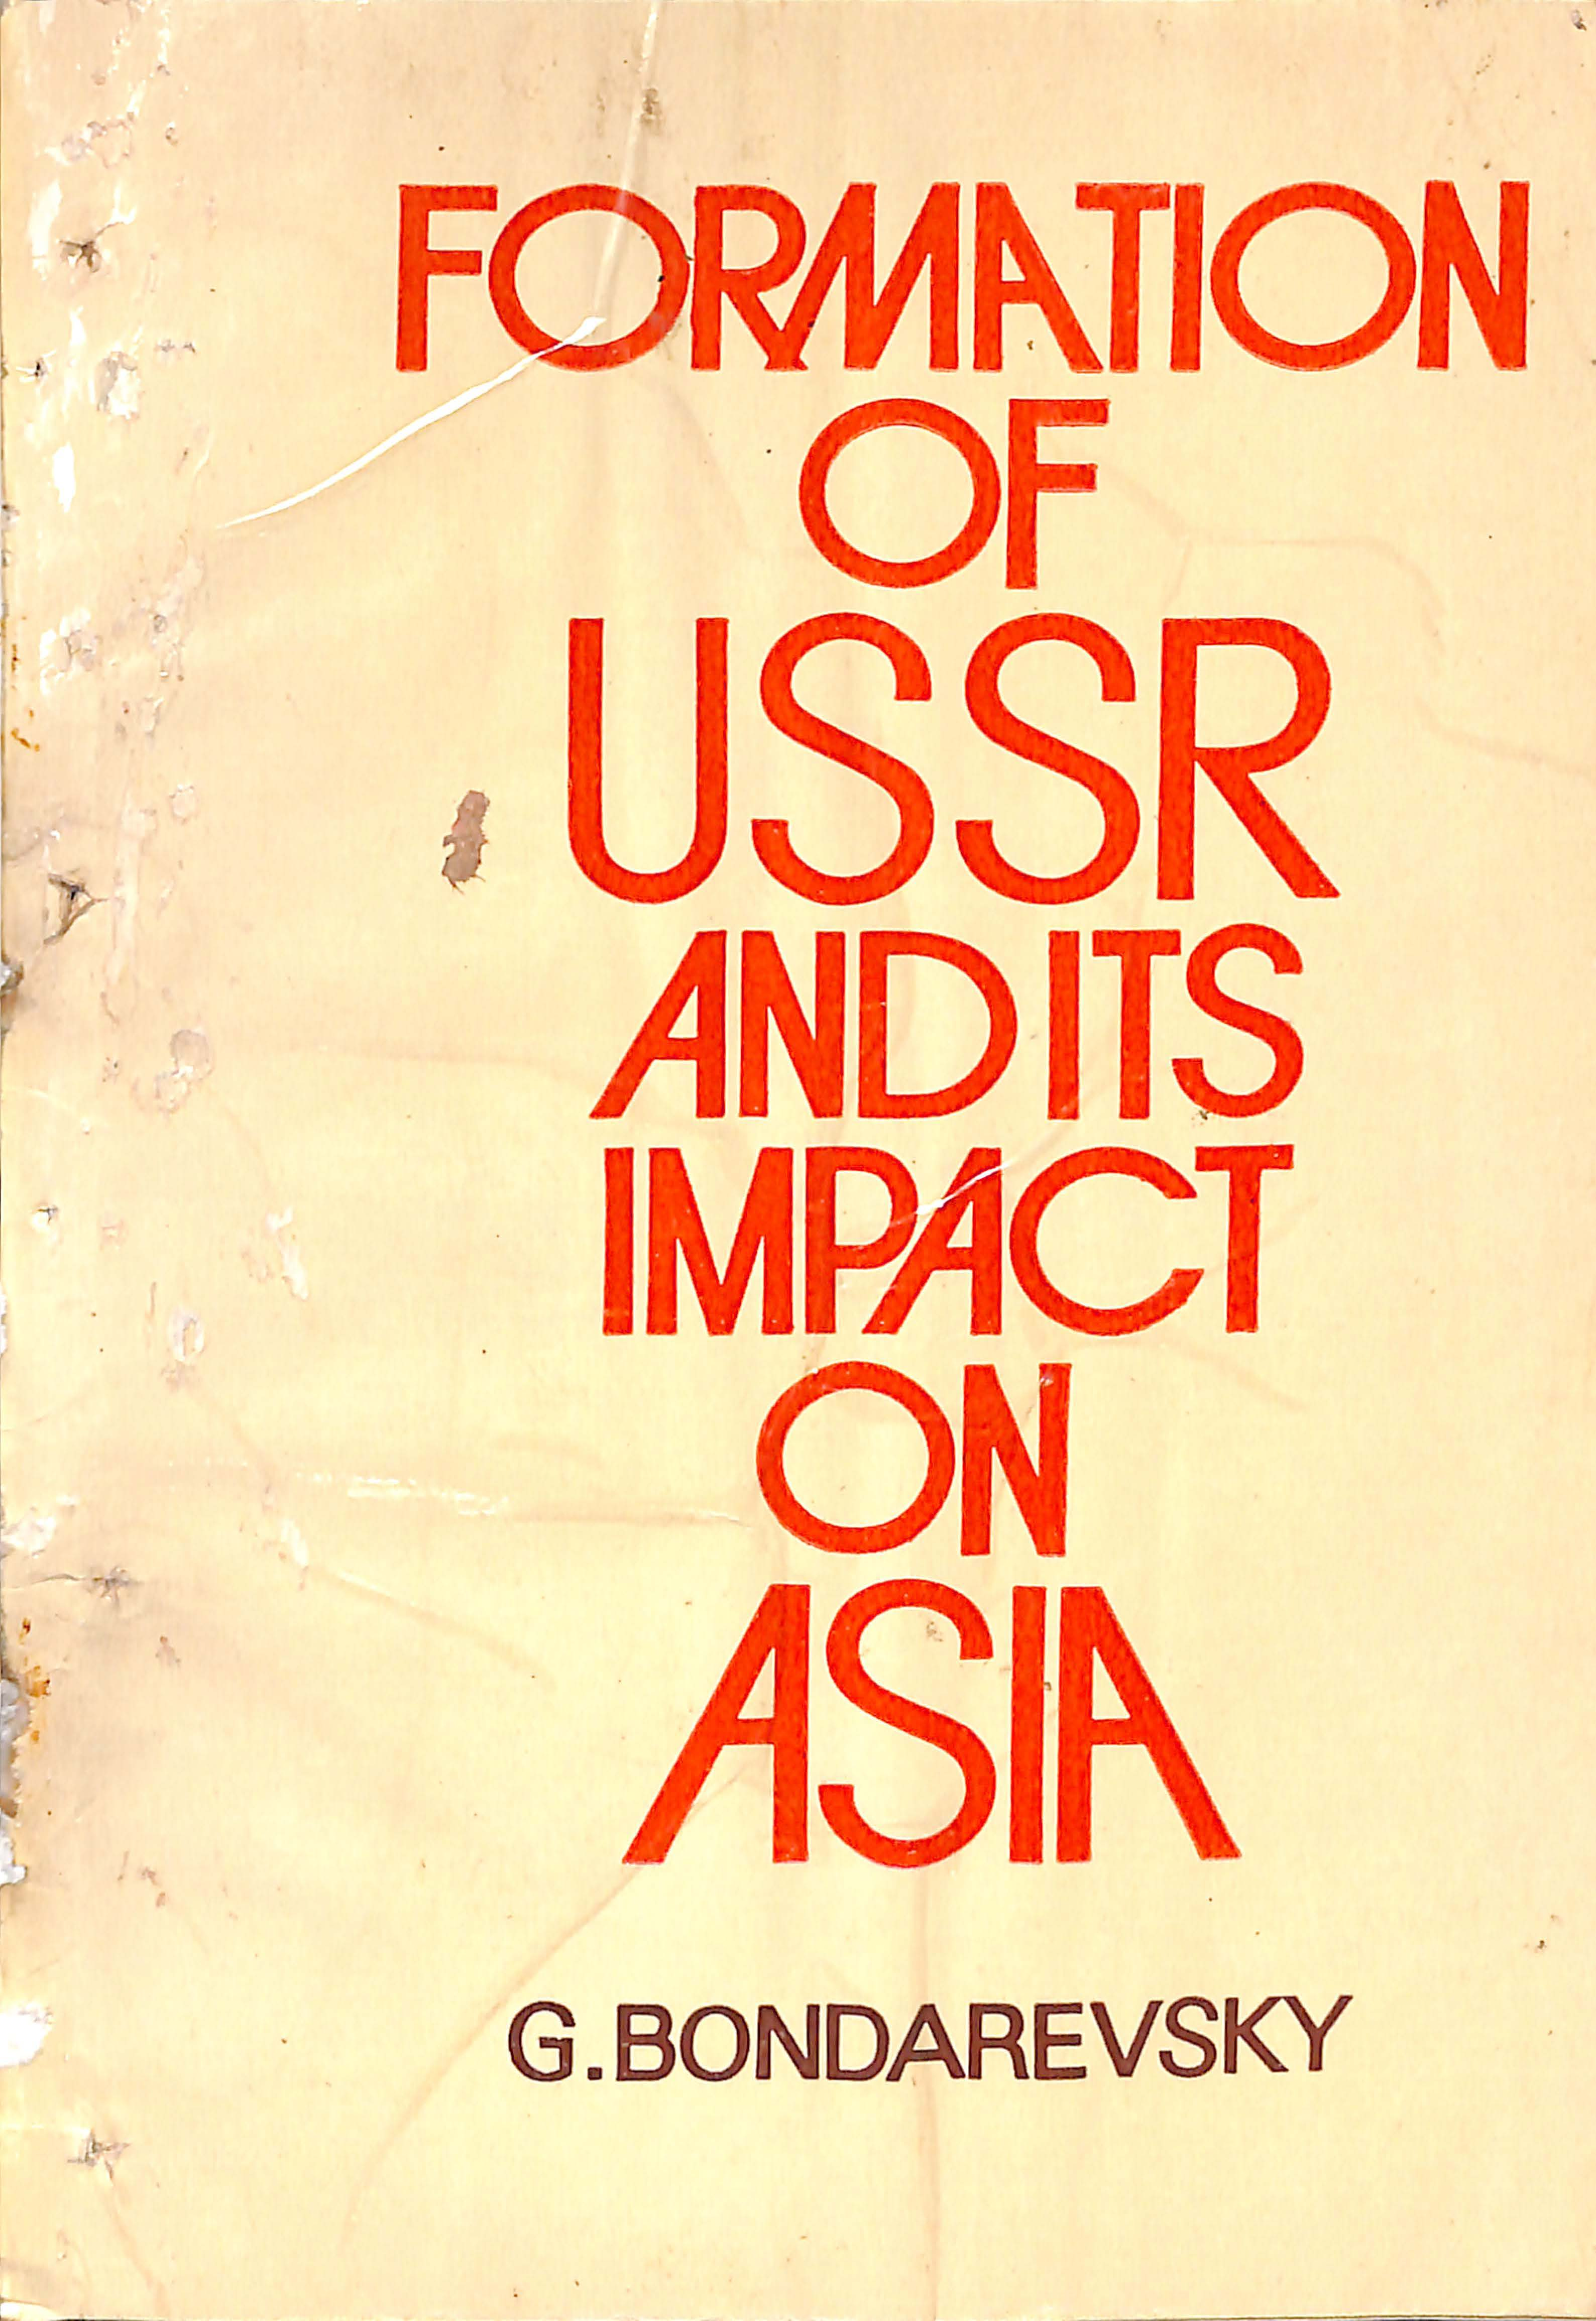 FORMATION OF USSR AND ITS IMPACT ON ASIA